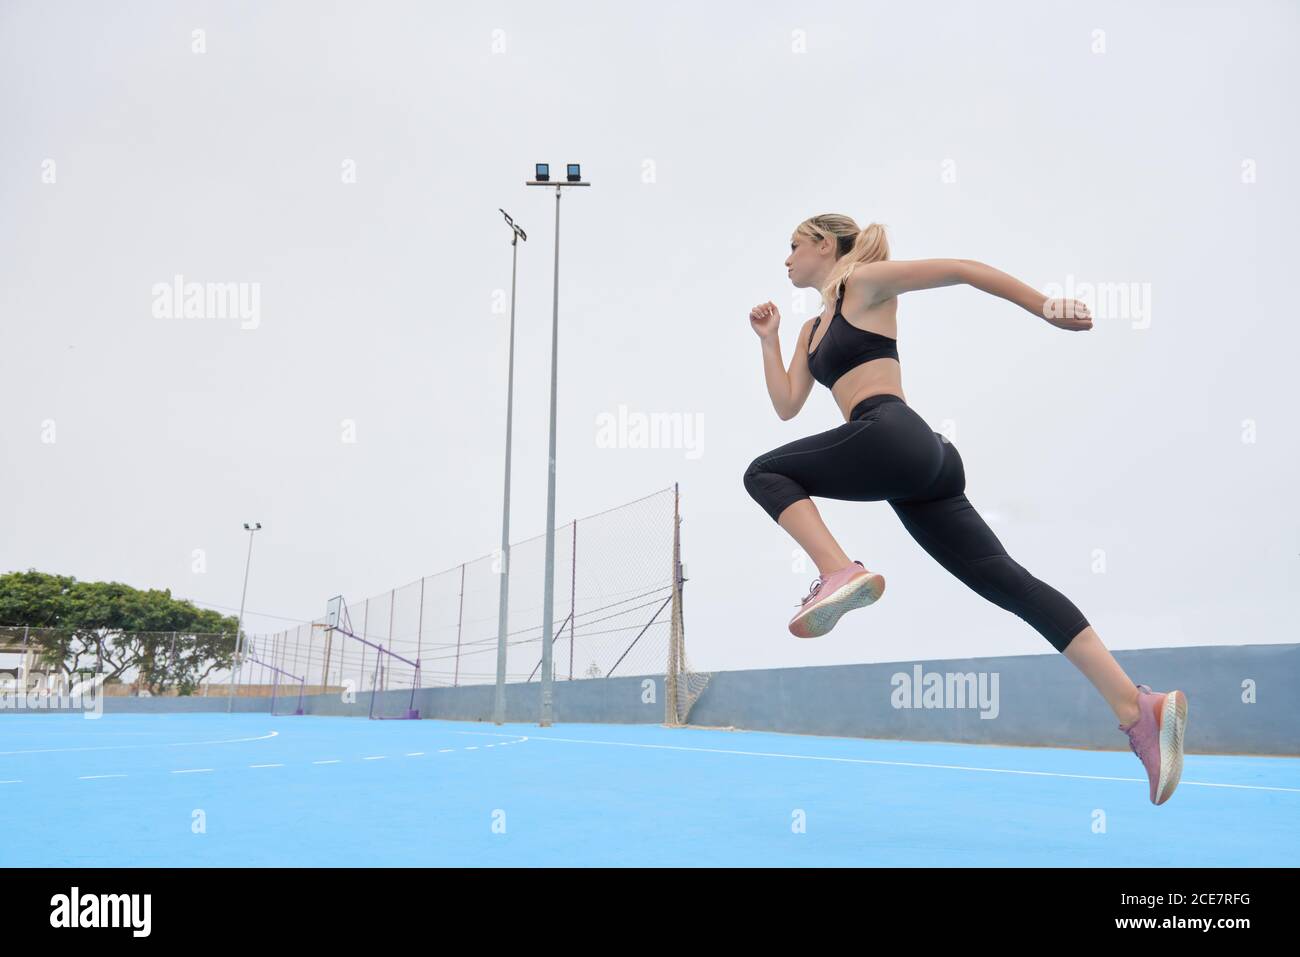 Low angle side view of determined confident young female athlete in fitness outfit jumping on sports ground Stock Photo